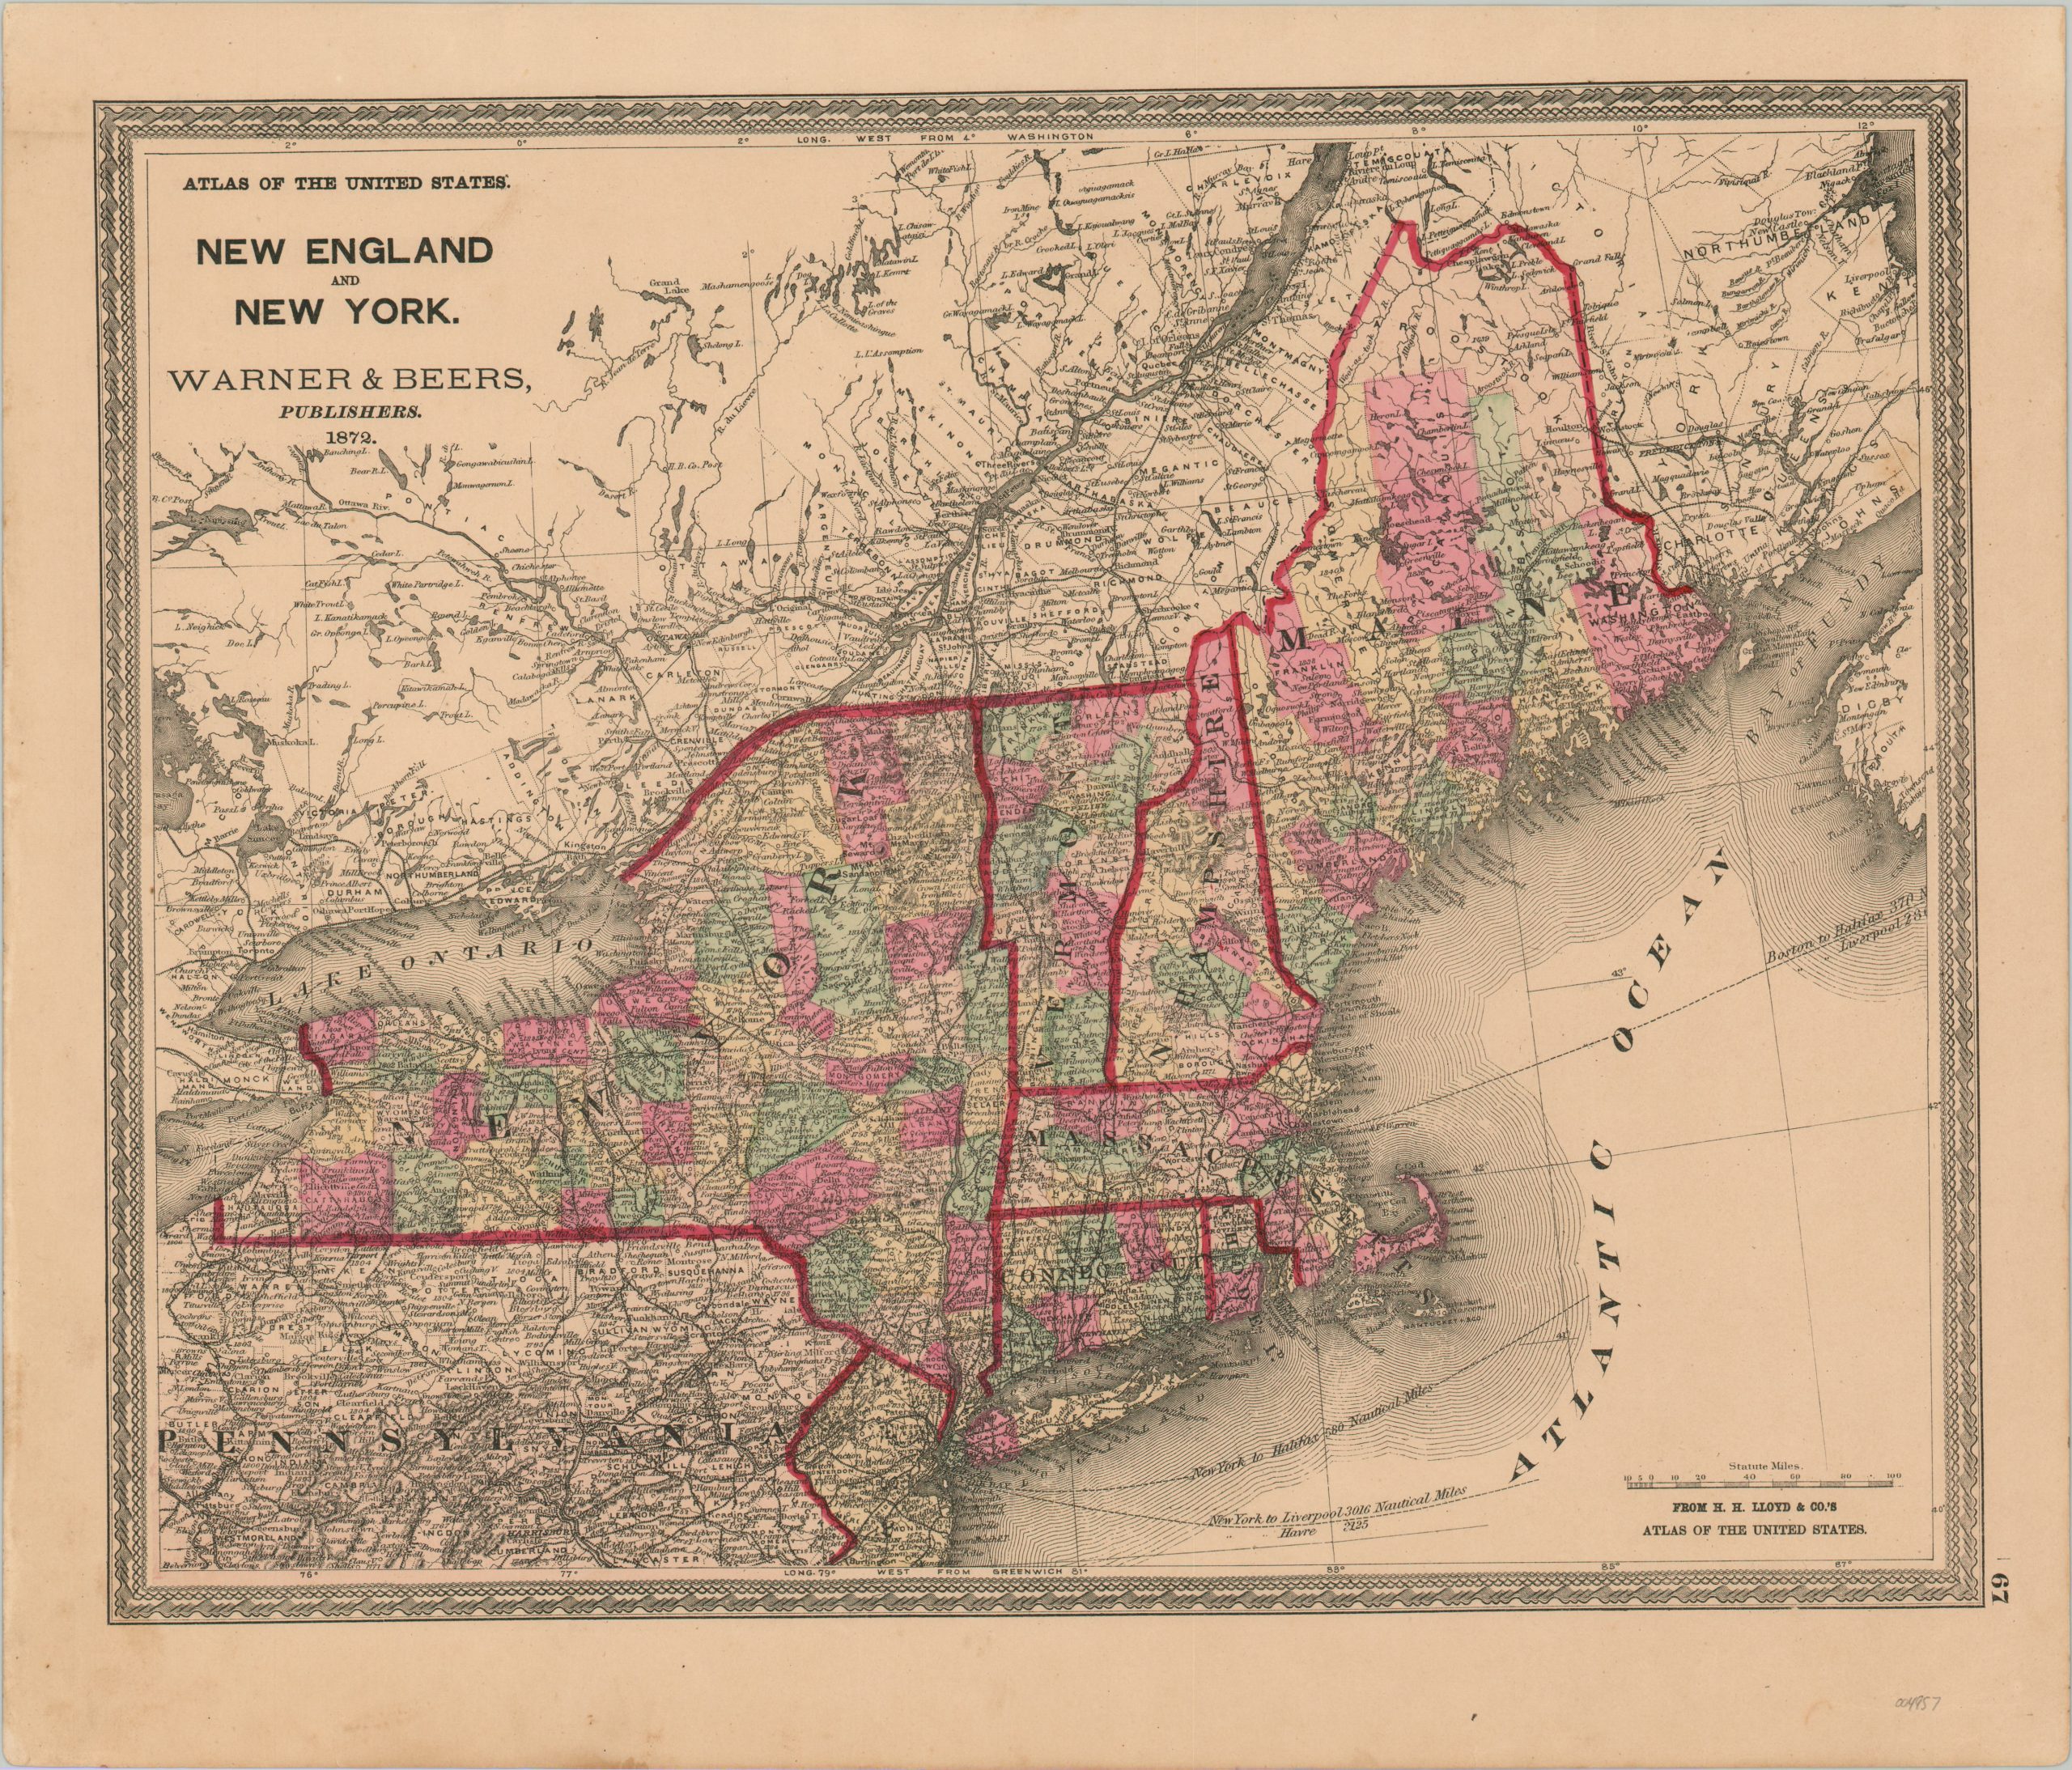 New England and New York – Curtis Wright Maps